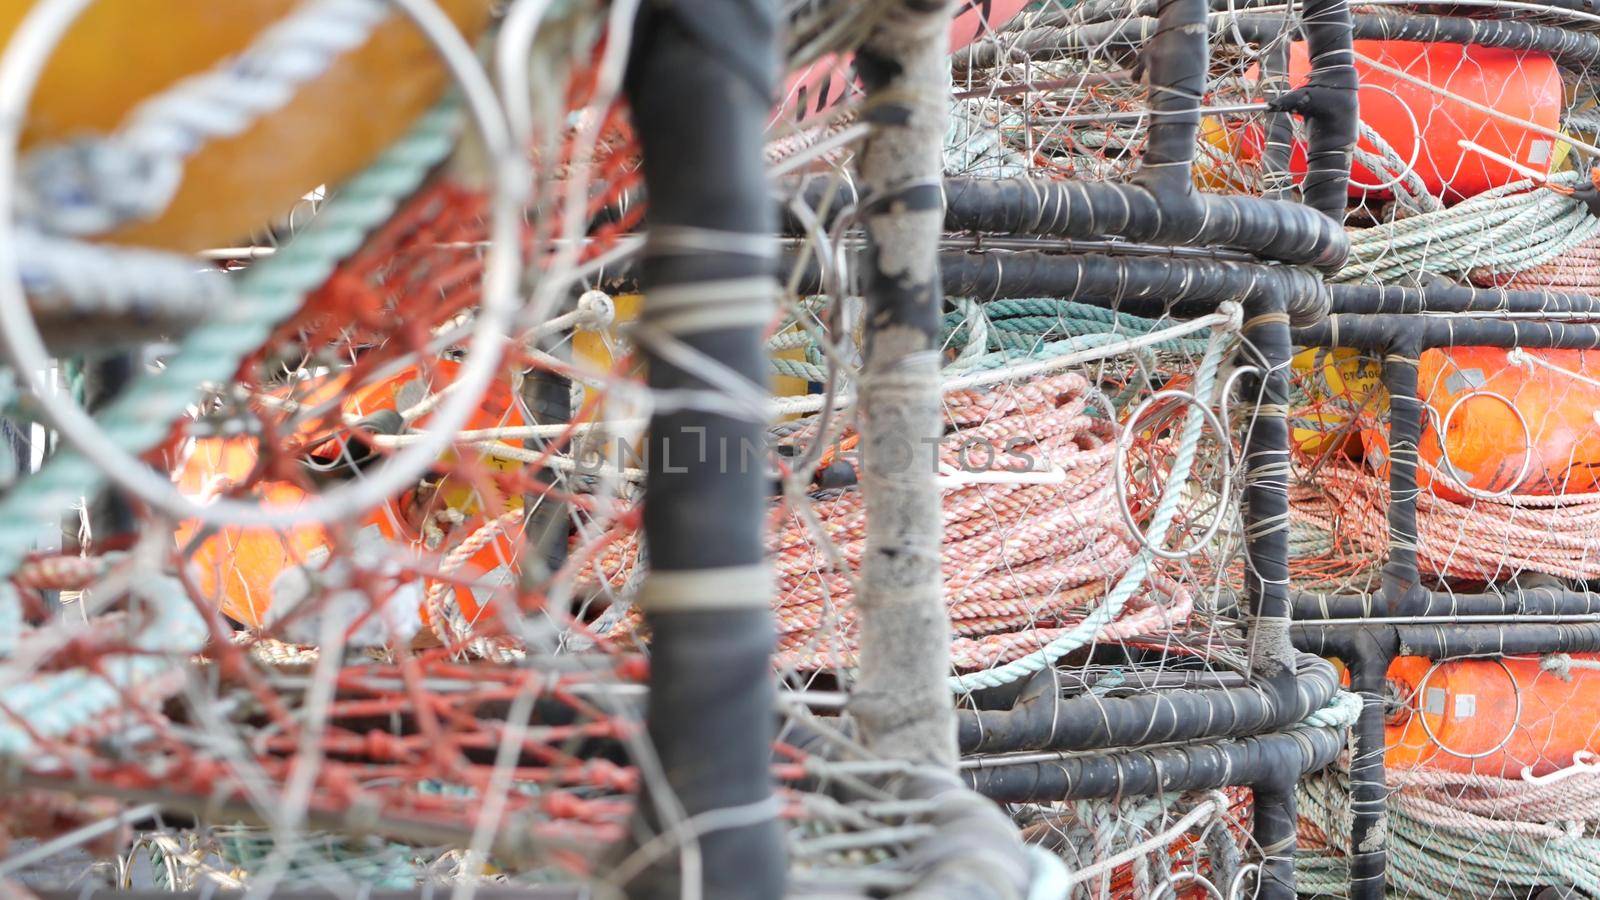 Traps, ropes and cages on pier, commercial dock, fishing industry, Monterey California USA. Empty pots, creels for fish seafood catching in port. Many fisherman's nets and baskets in seaport. Fishery.